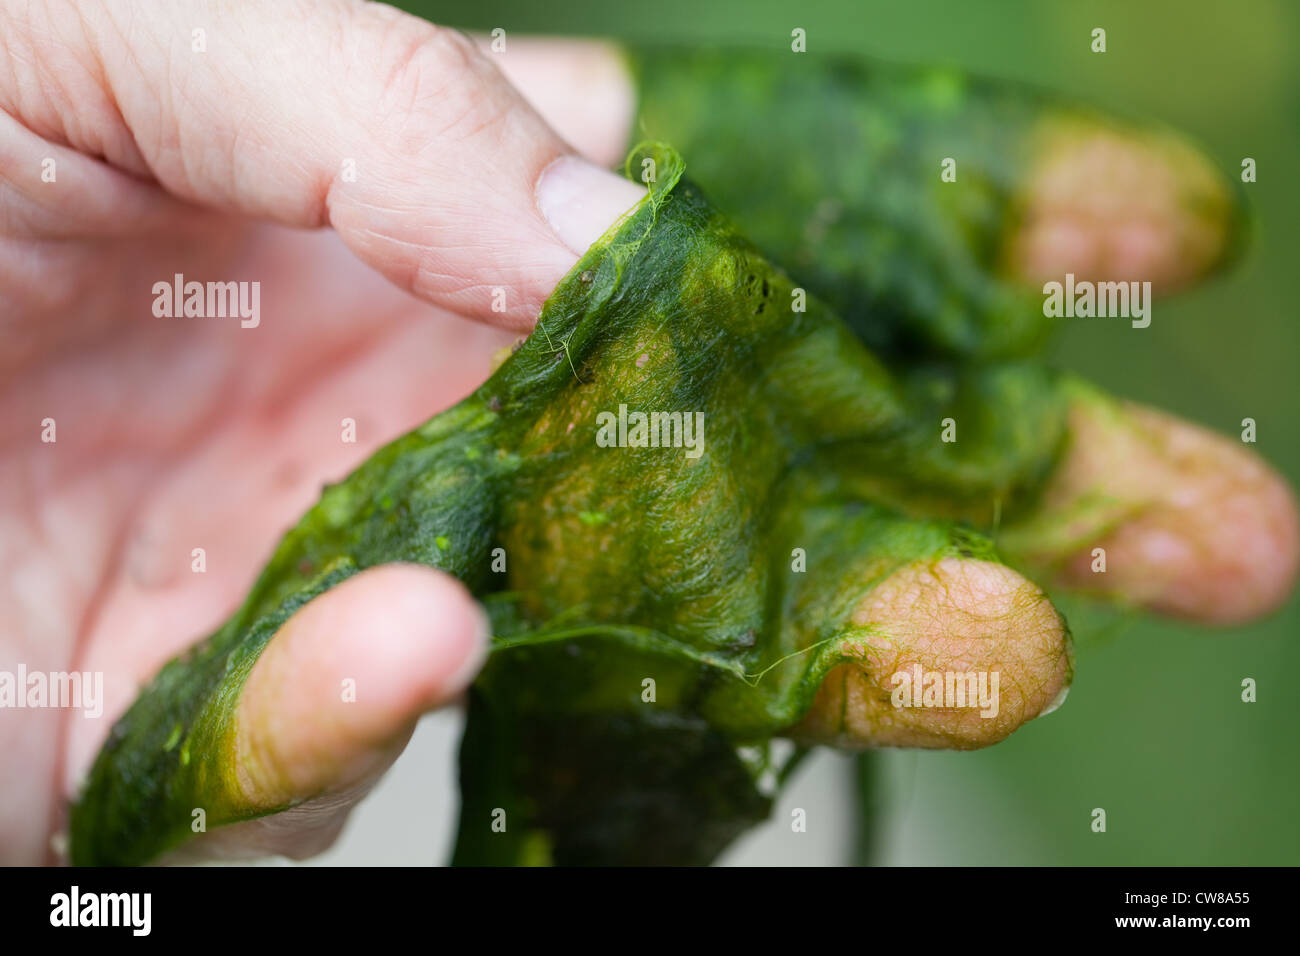 Blanket Weed (Cladophora sp. ) . Filamentous algae, held in the hand. Gleaned from a pond in summer. Stock Photo